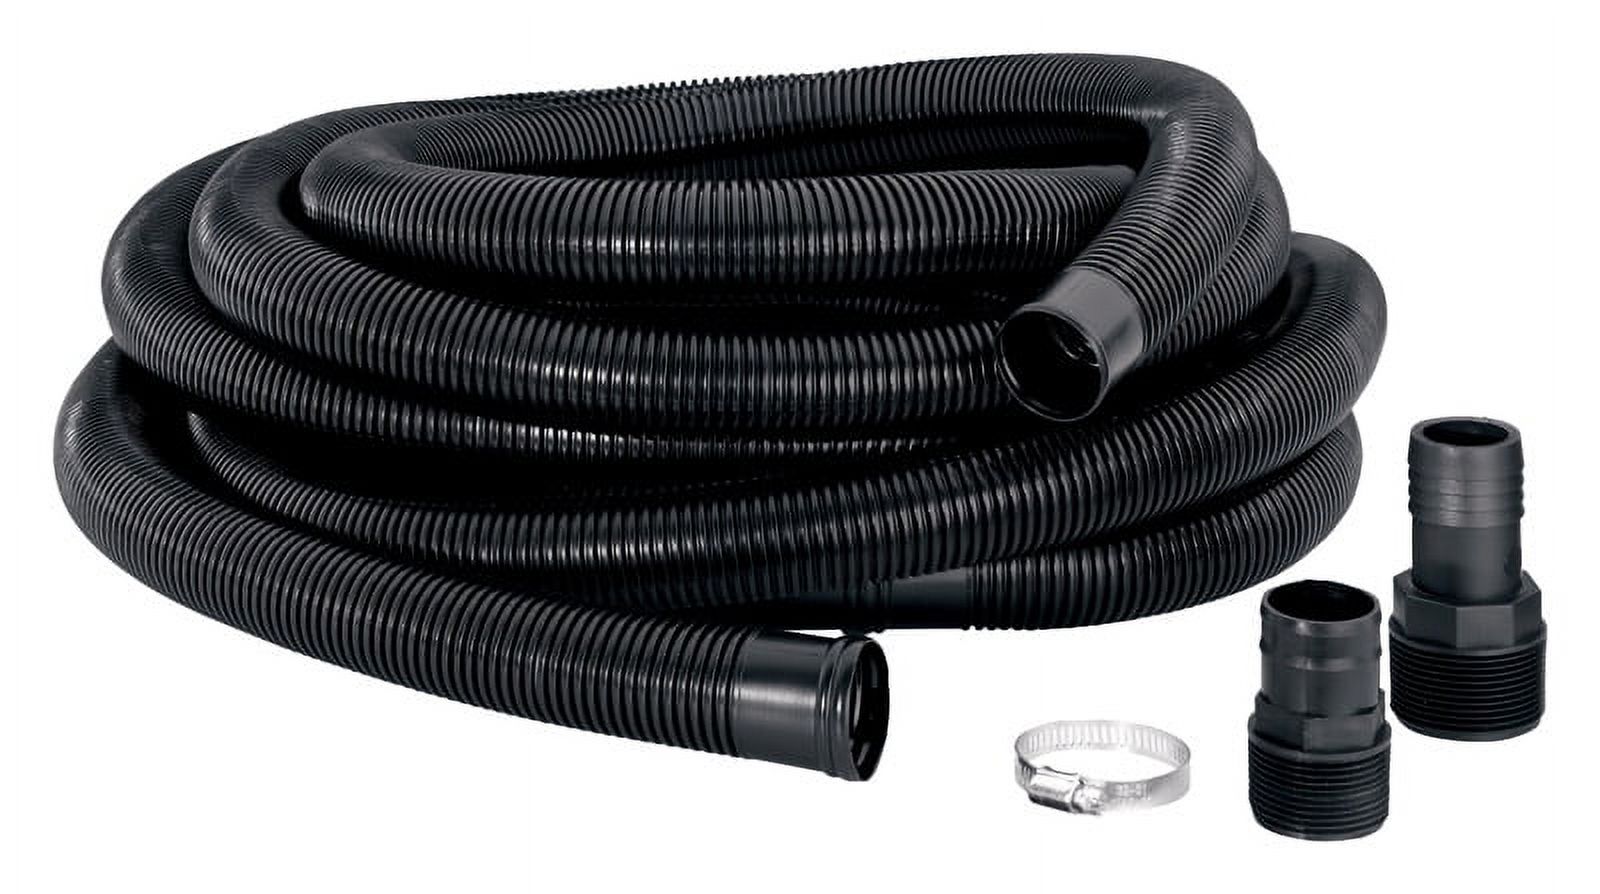 Parts 2O Silicone Radiator Discharge Sump Pump Hose Kit - image 1 of 2